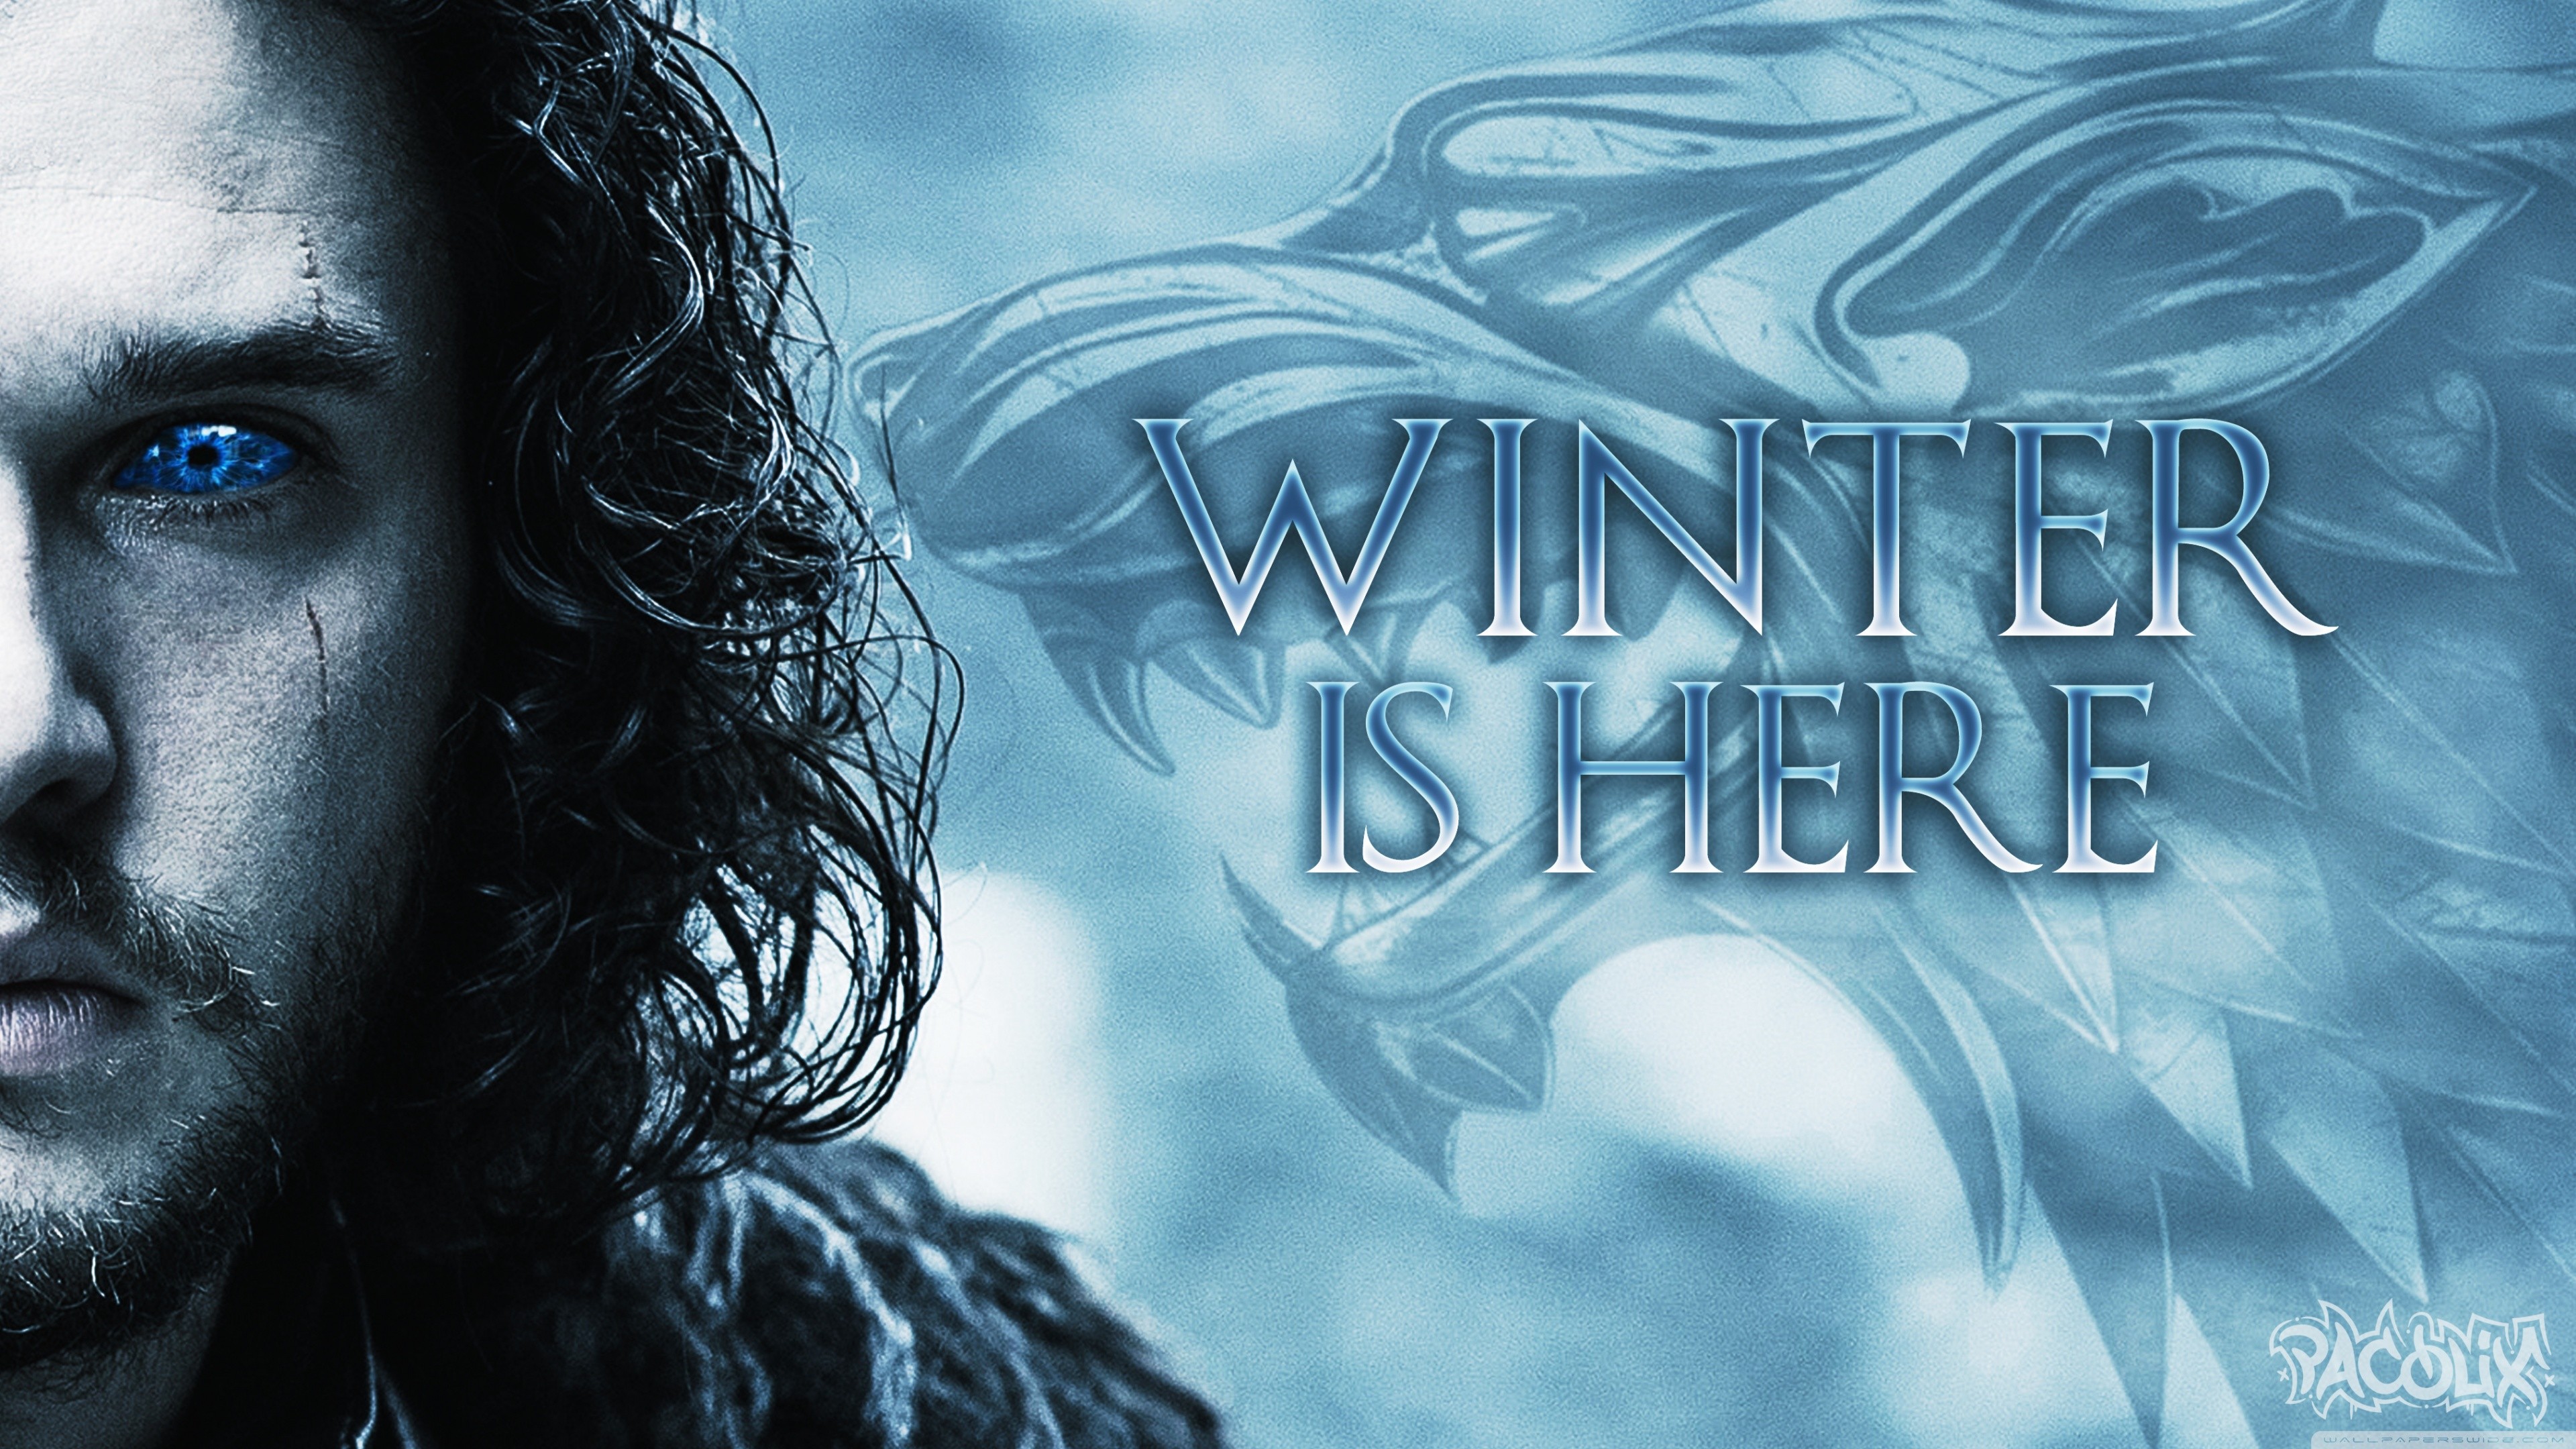 3840x2160 The Best Game of Thrones Wallpapers for Your Phone